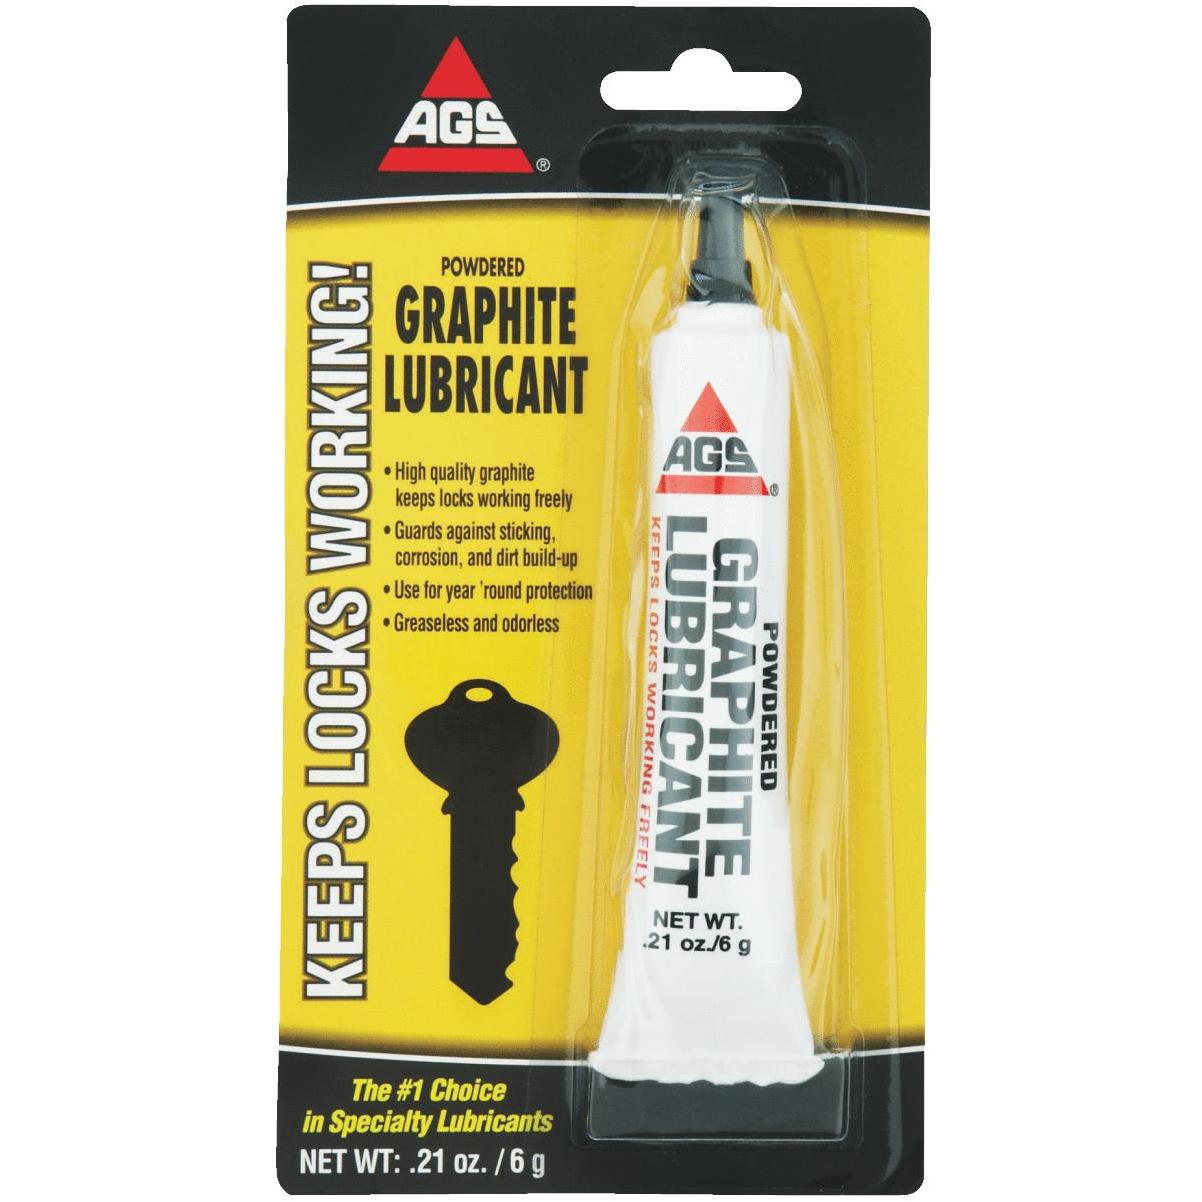 AGS Powdered Graphite Lubricant - Keeps Locks Working Freely 1.13 oz (2  Pack)